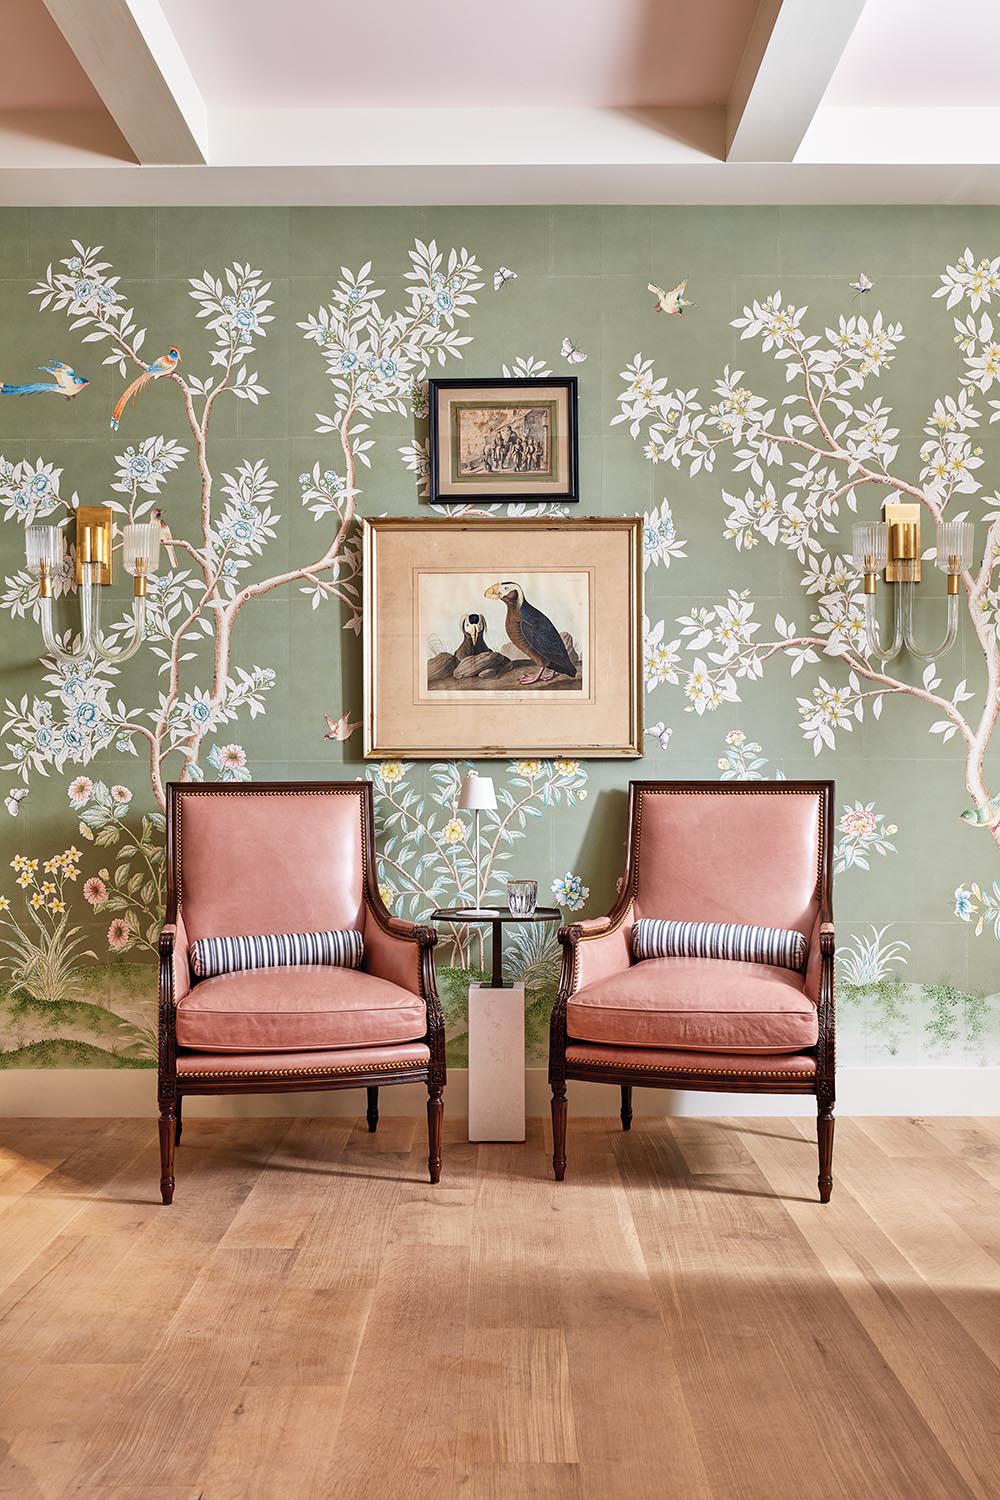 Pair of chairs in a shade of pink sit against green scenic wallpaper with pair of brass sconces in secret speakeasy designed by Corey Damen Jenkins